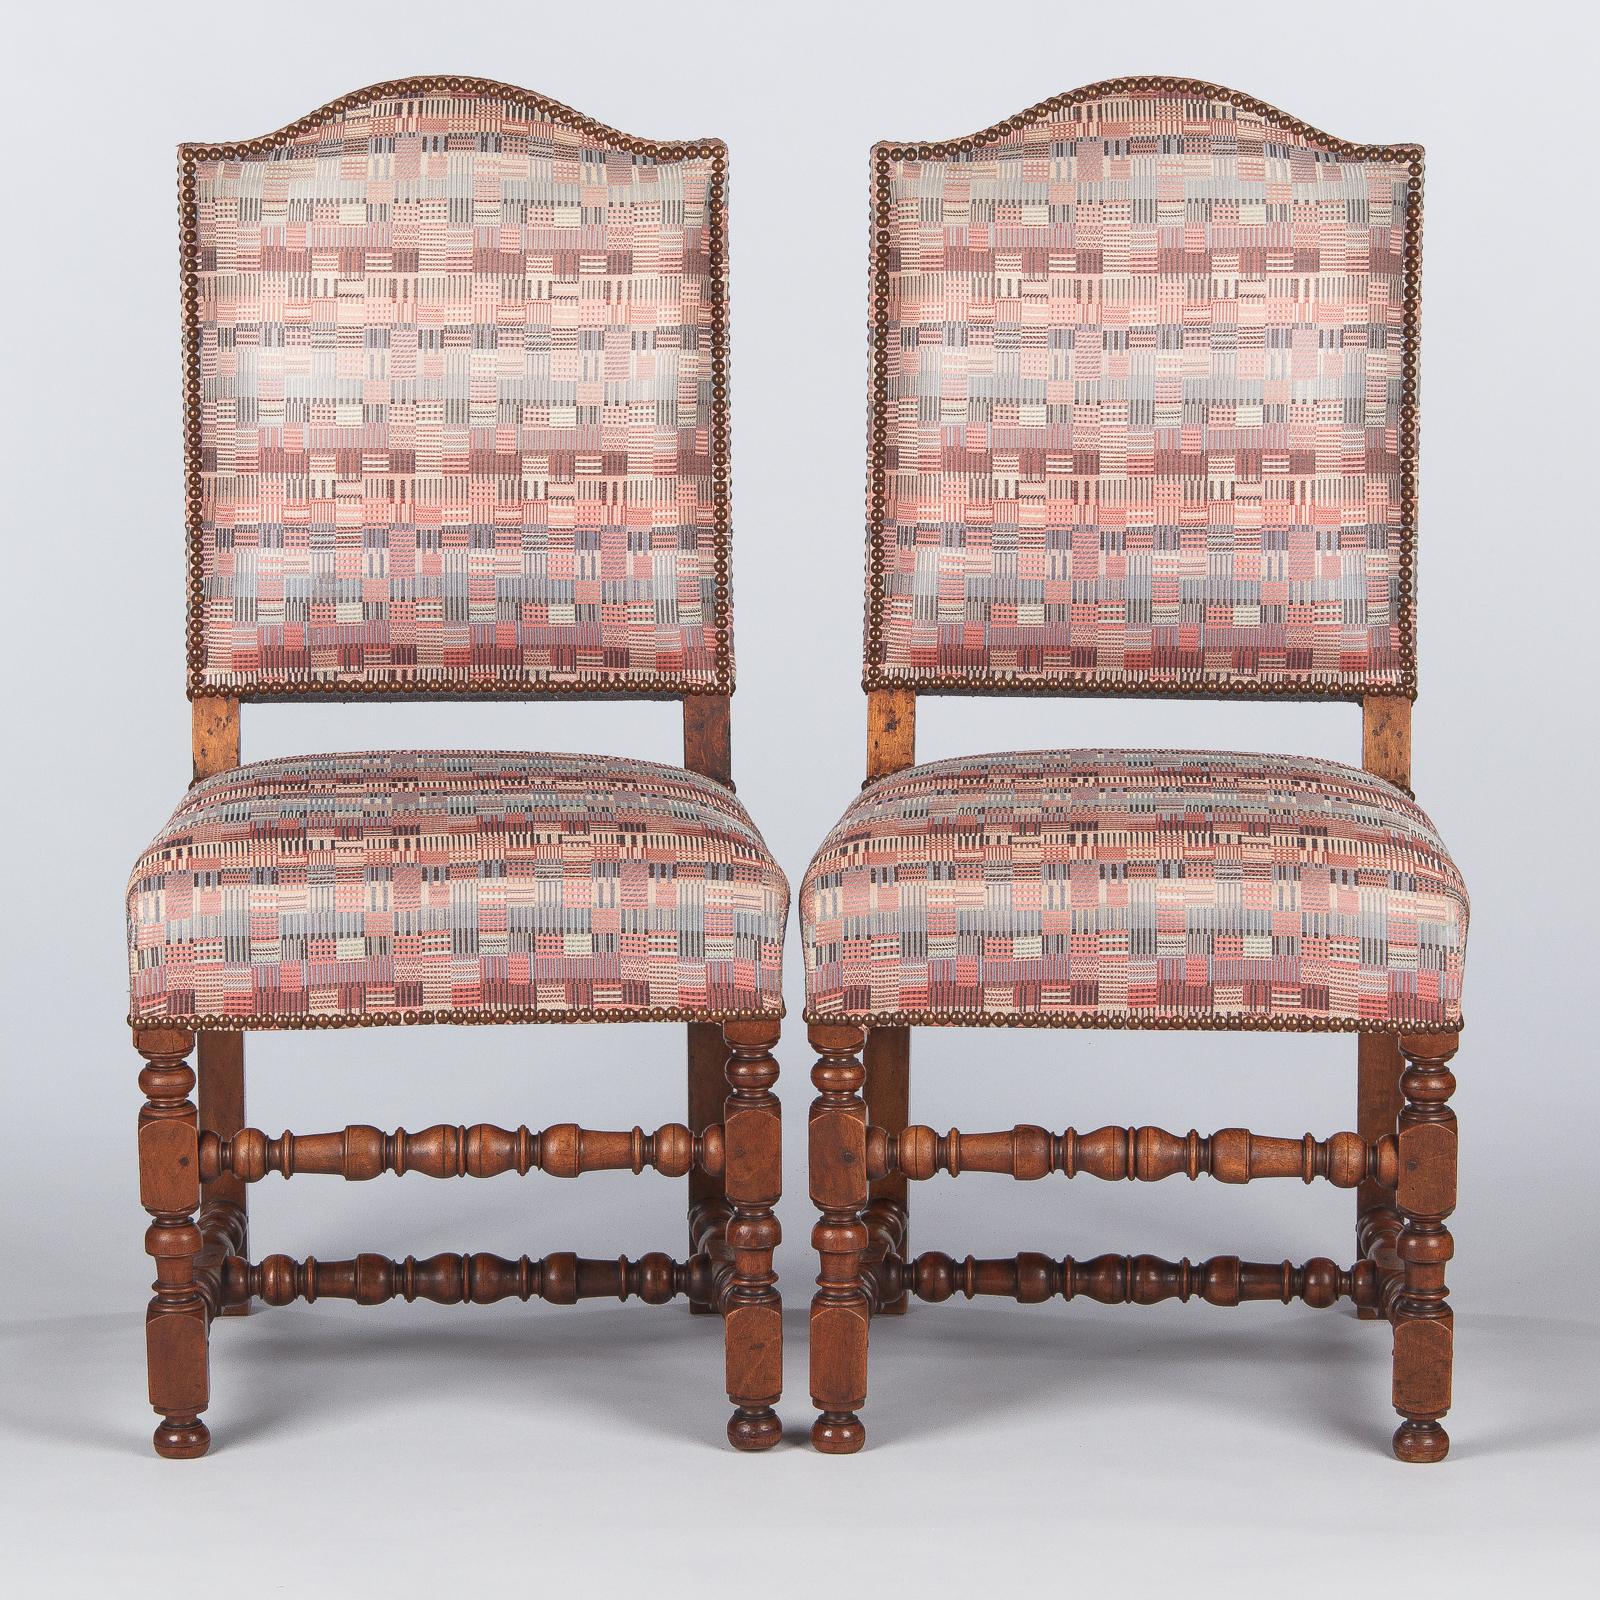 Set of 6 French Louis XIII Style Upholstered Walnut Chairs, 1920s (Stoff)